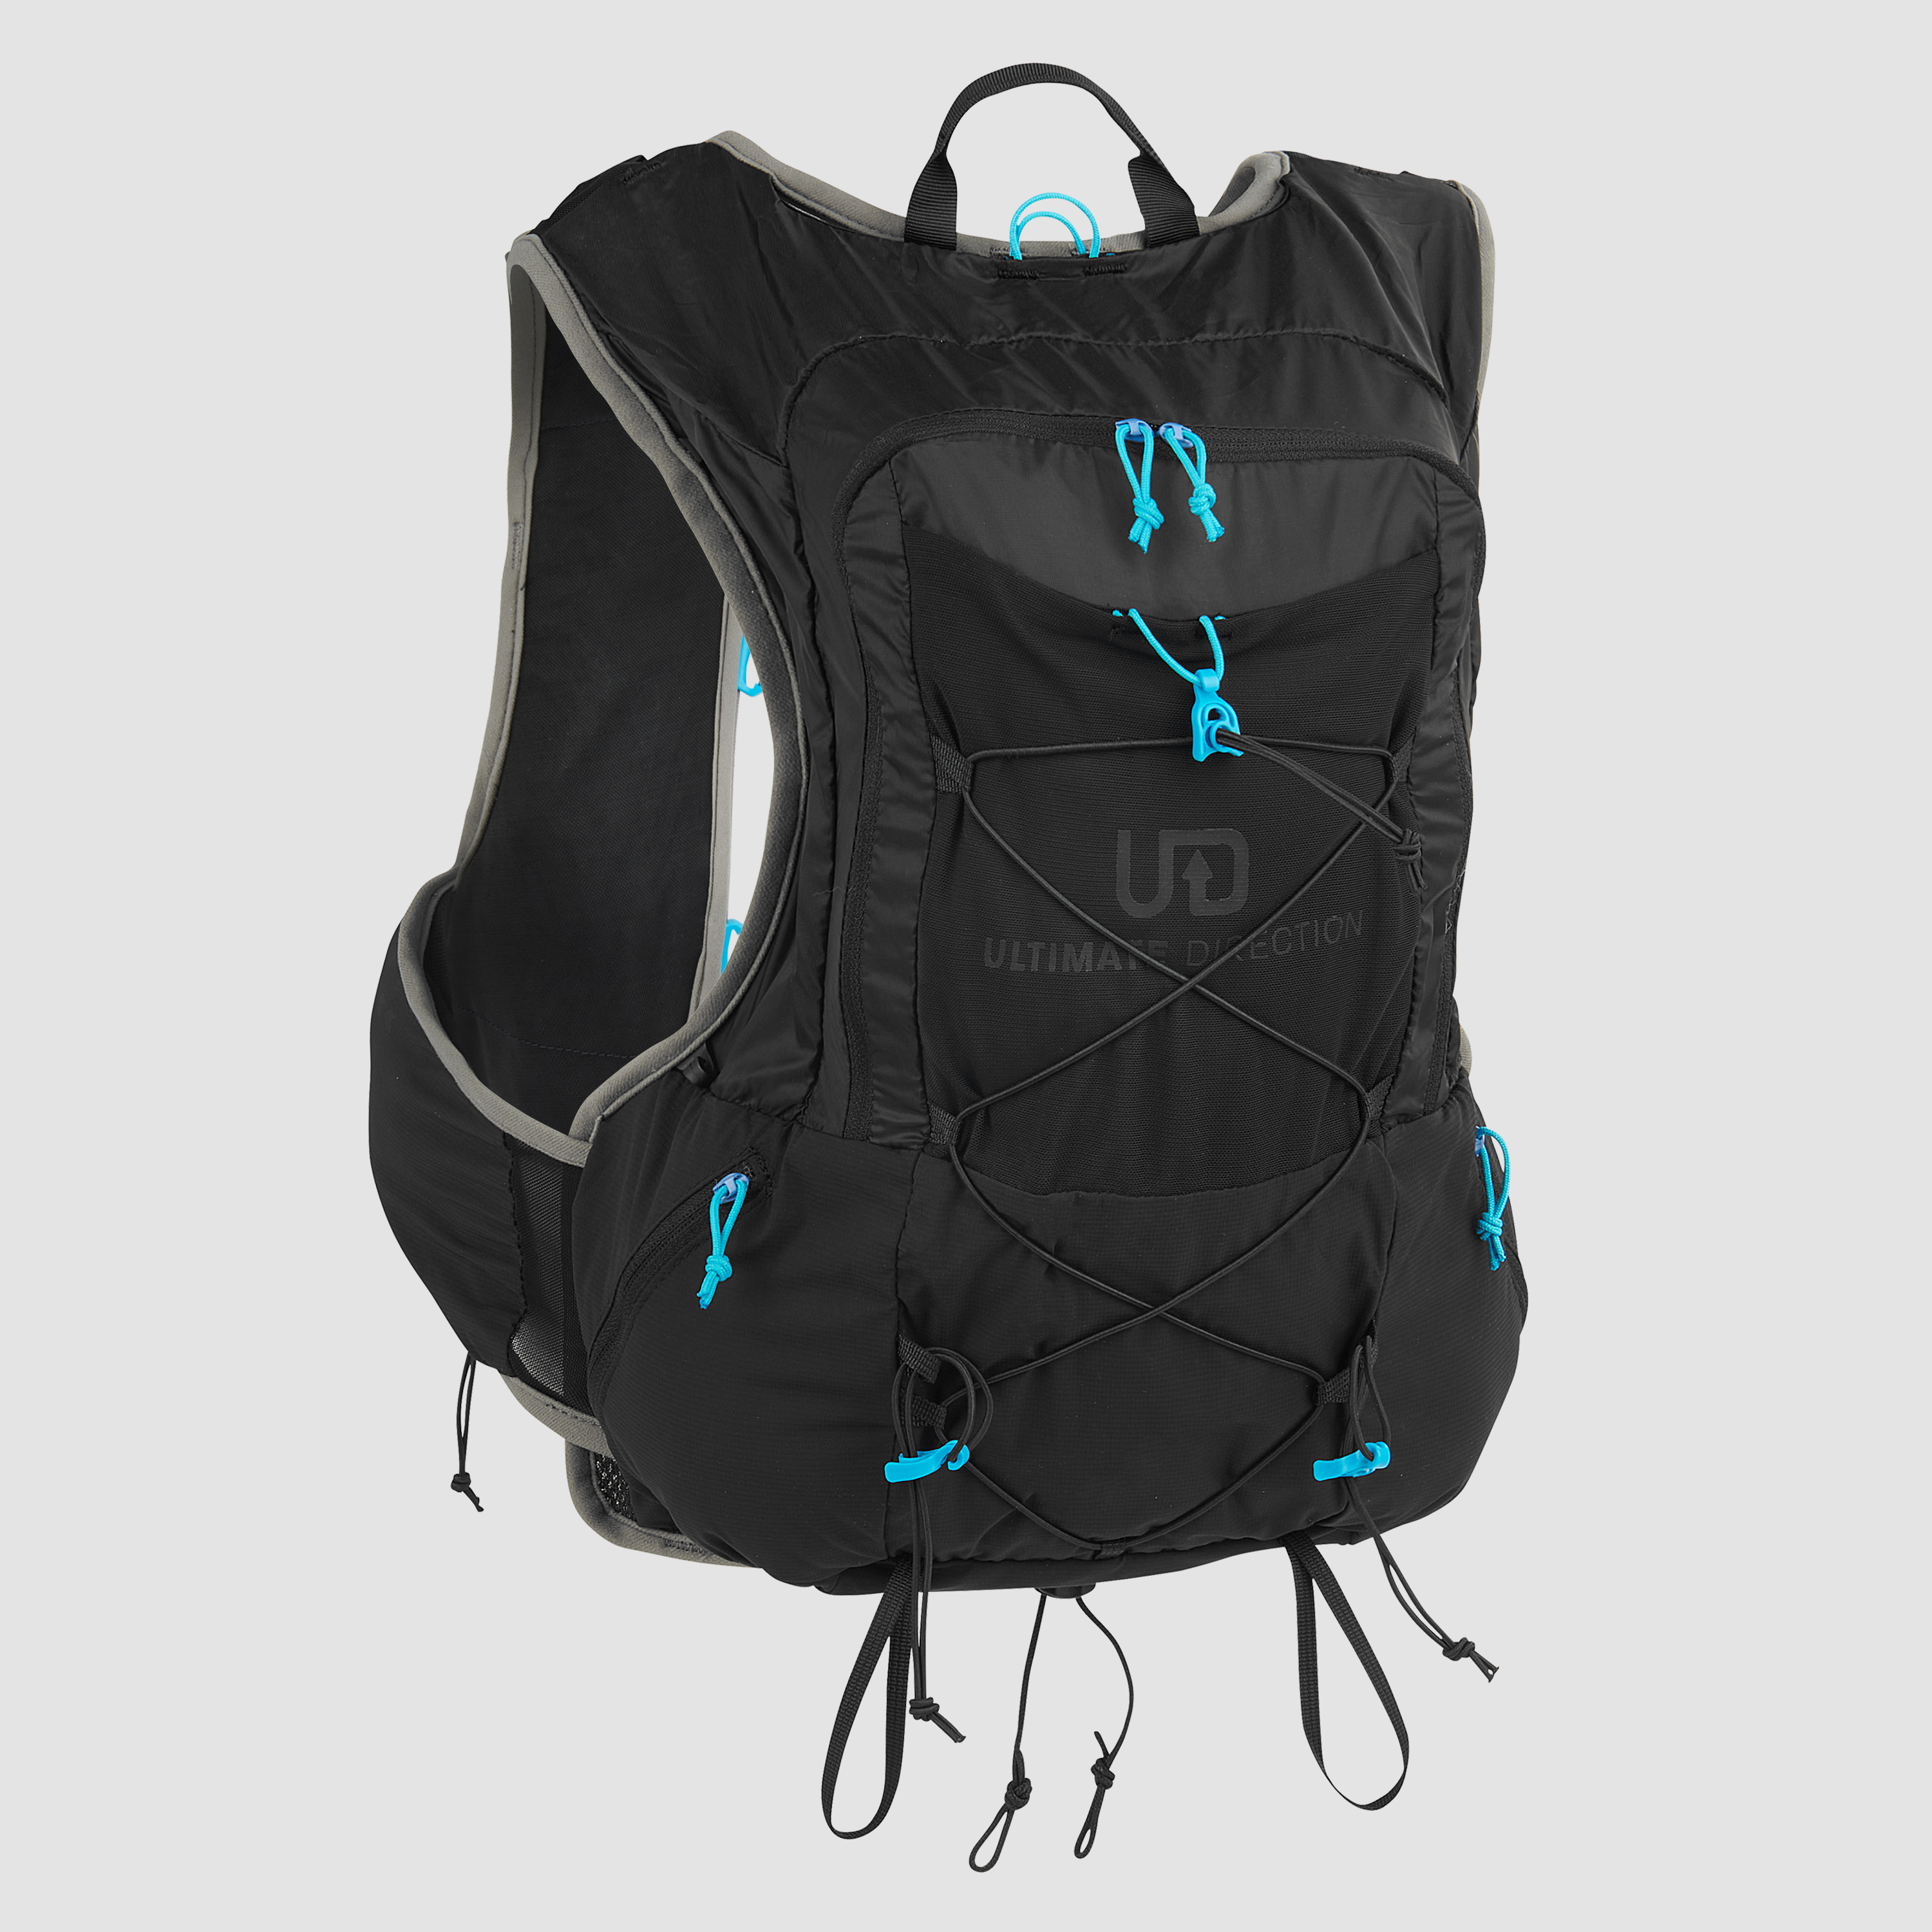 Ultimate Direction Mountain Vest 6.0 in Onyx Size Small